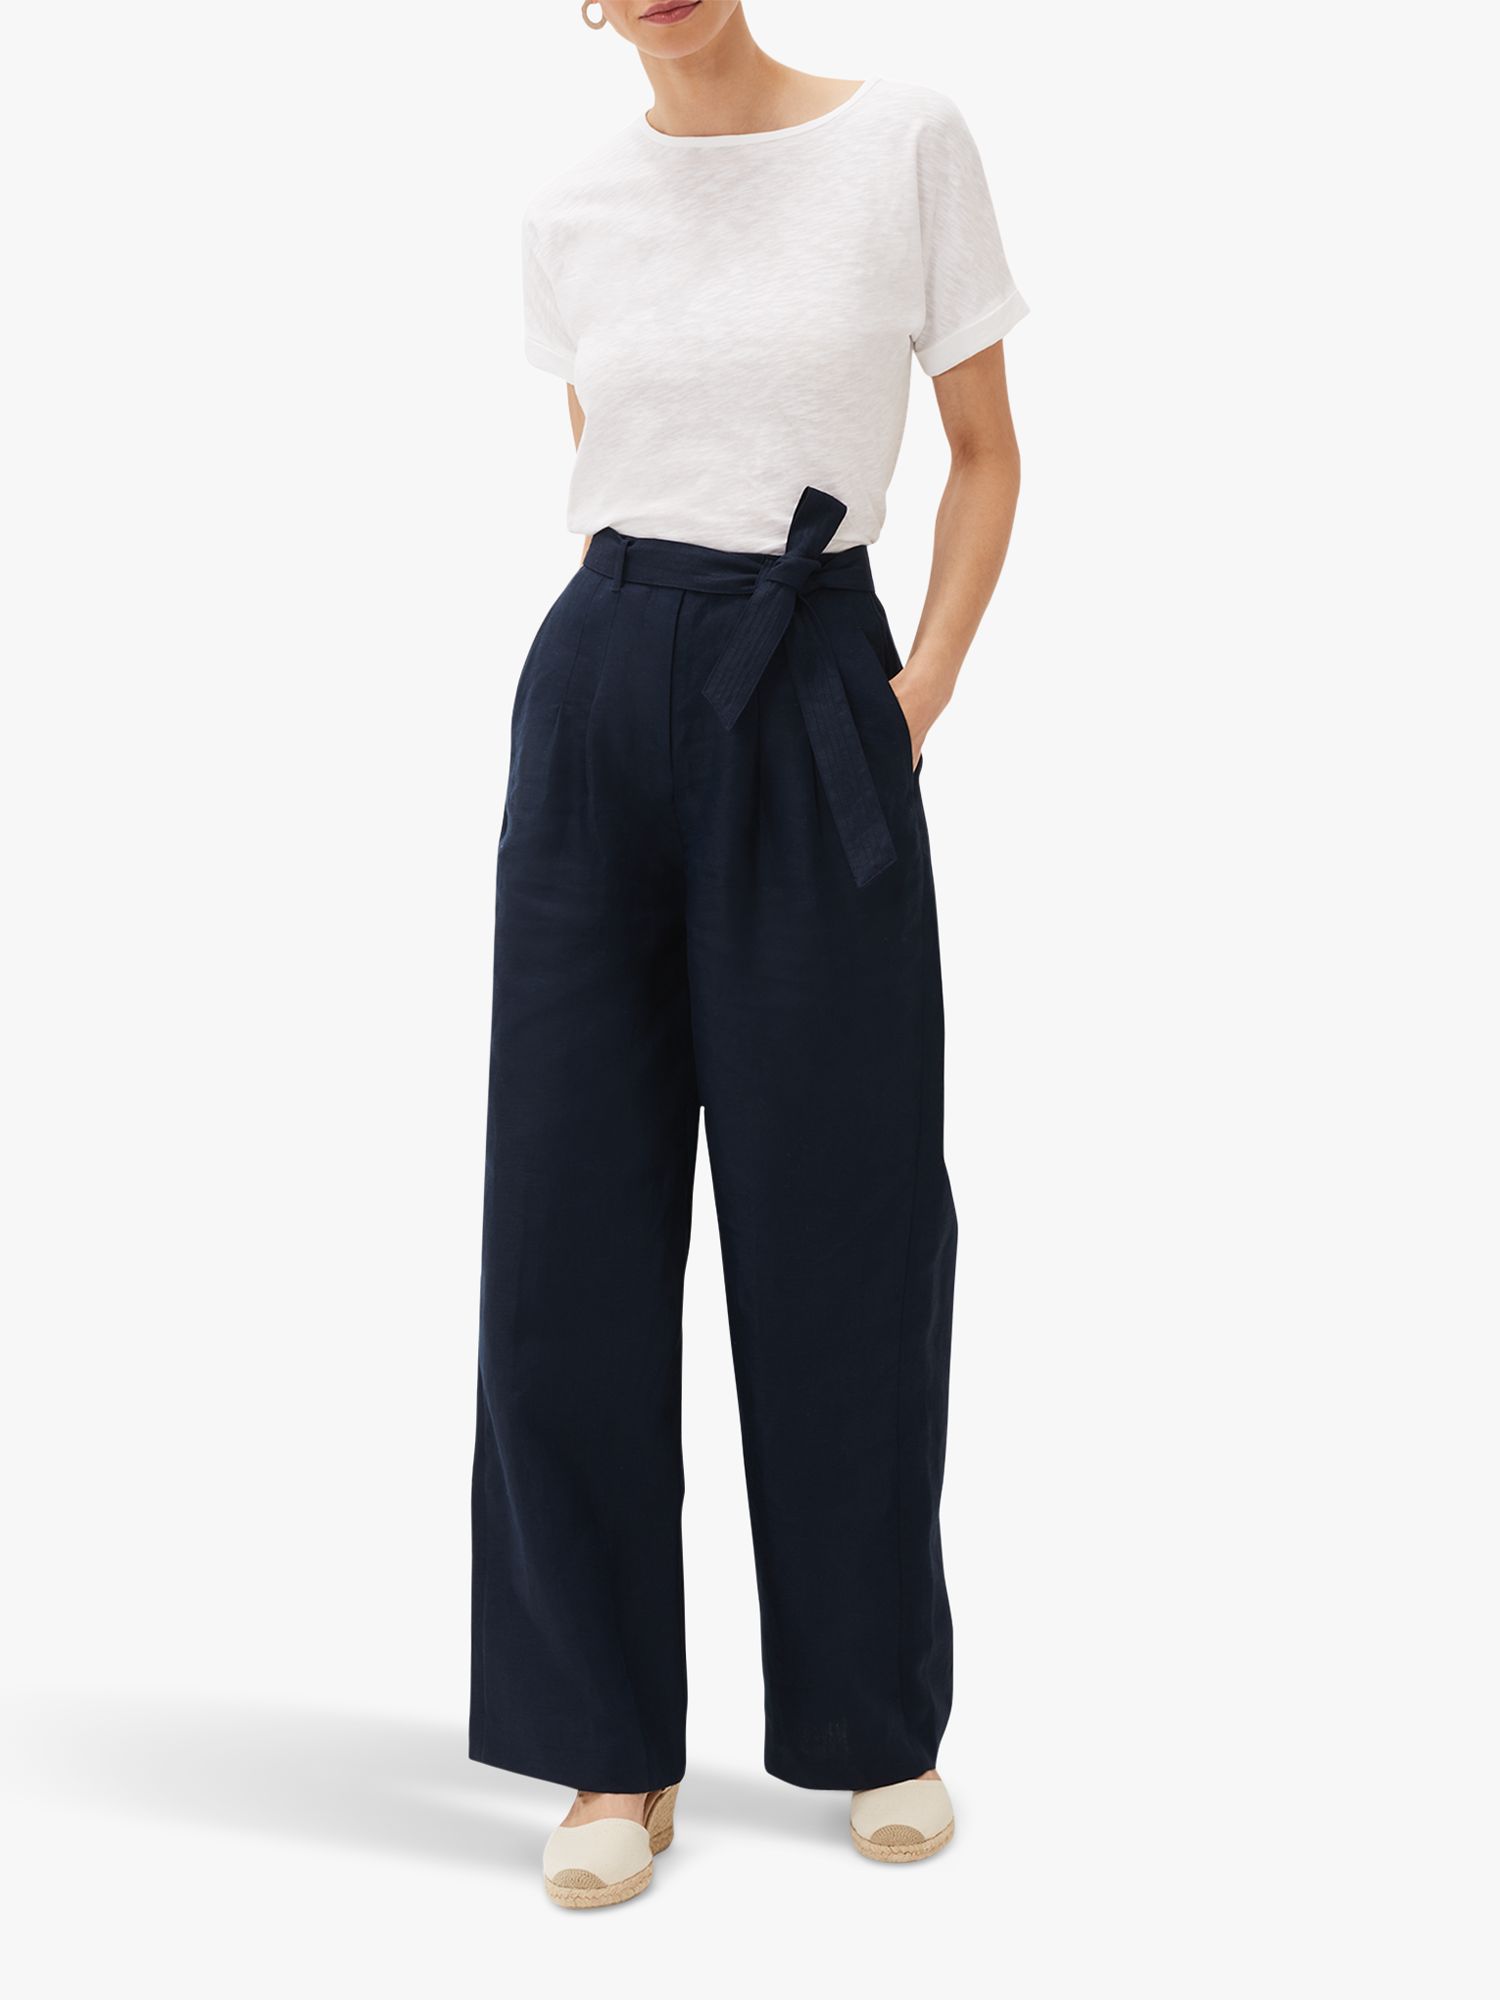 Phase Eight Aaliyah Linen Belted Trousers, Navy, 8